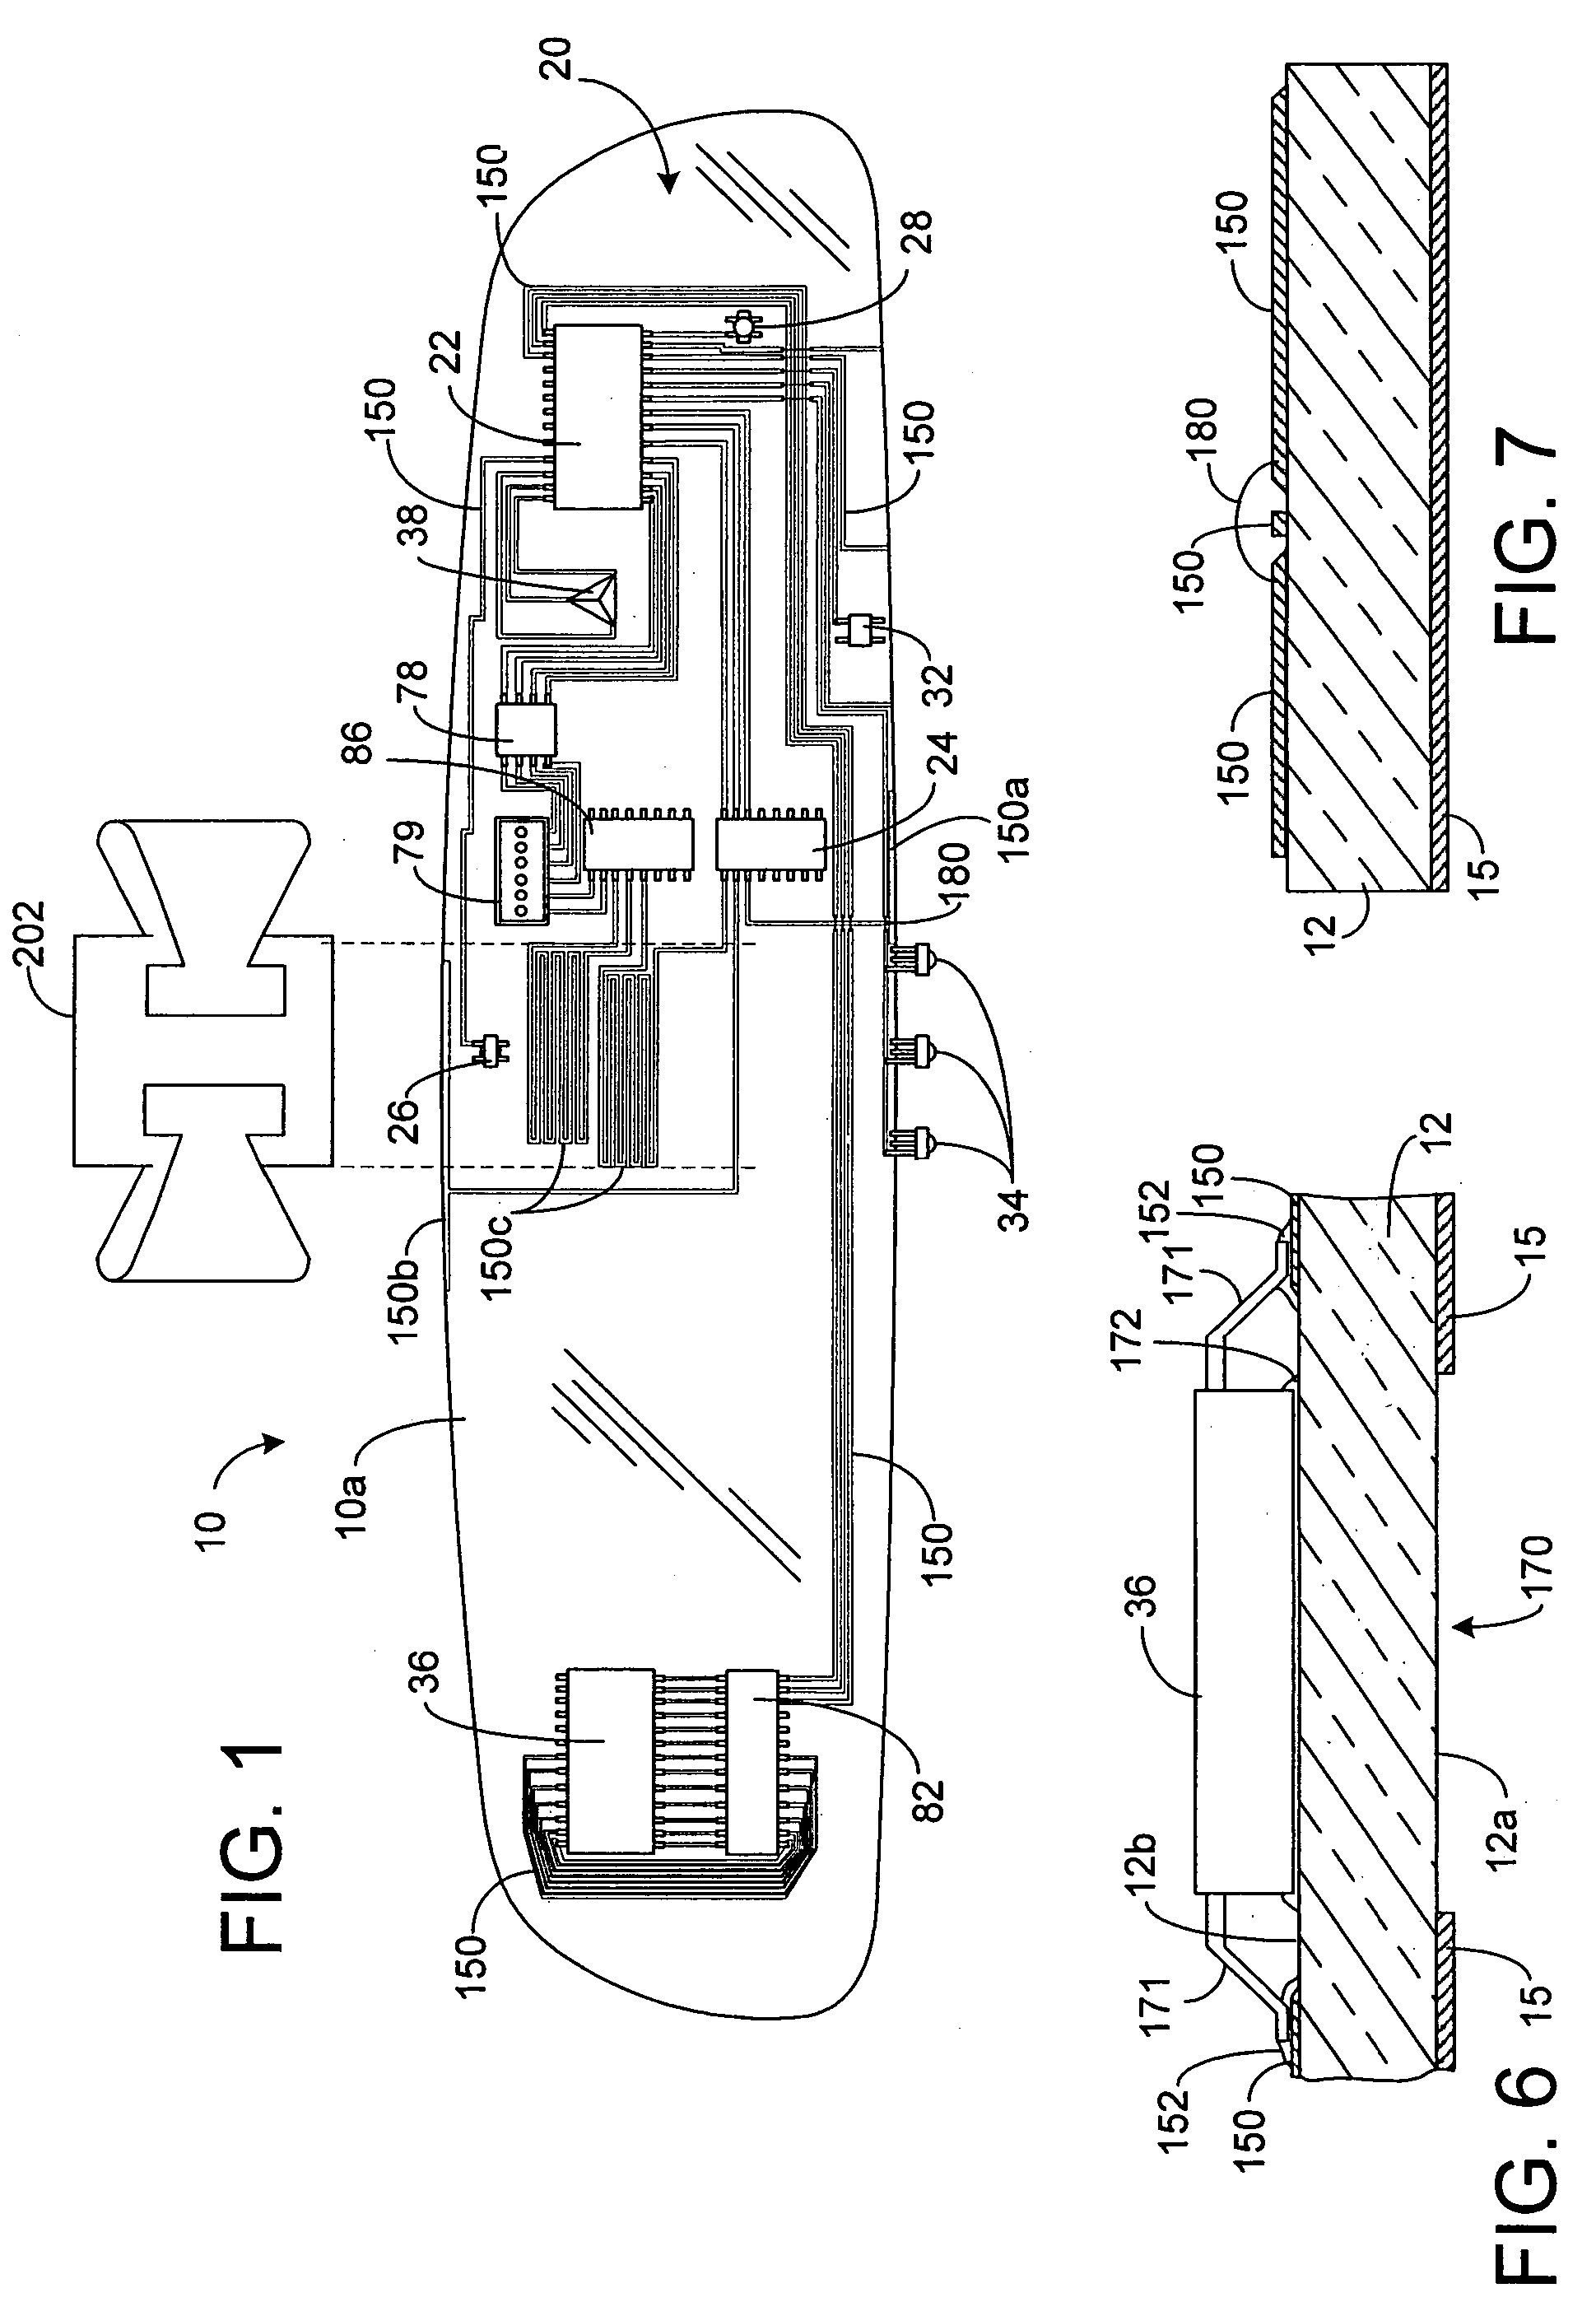 Rearview mirror element having a circuit mounted to the rear surface of the element